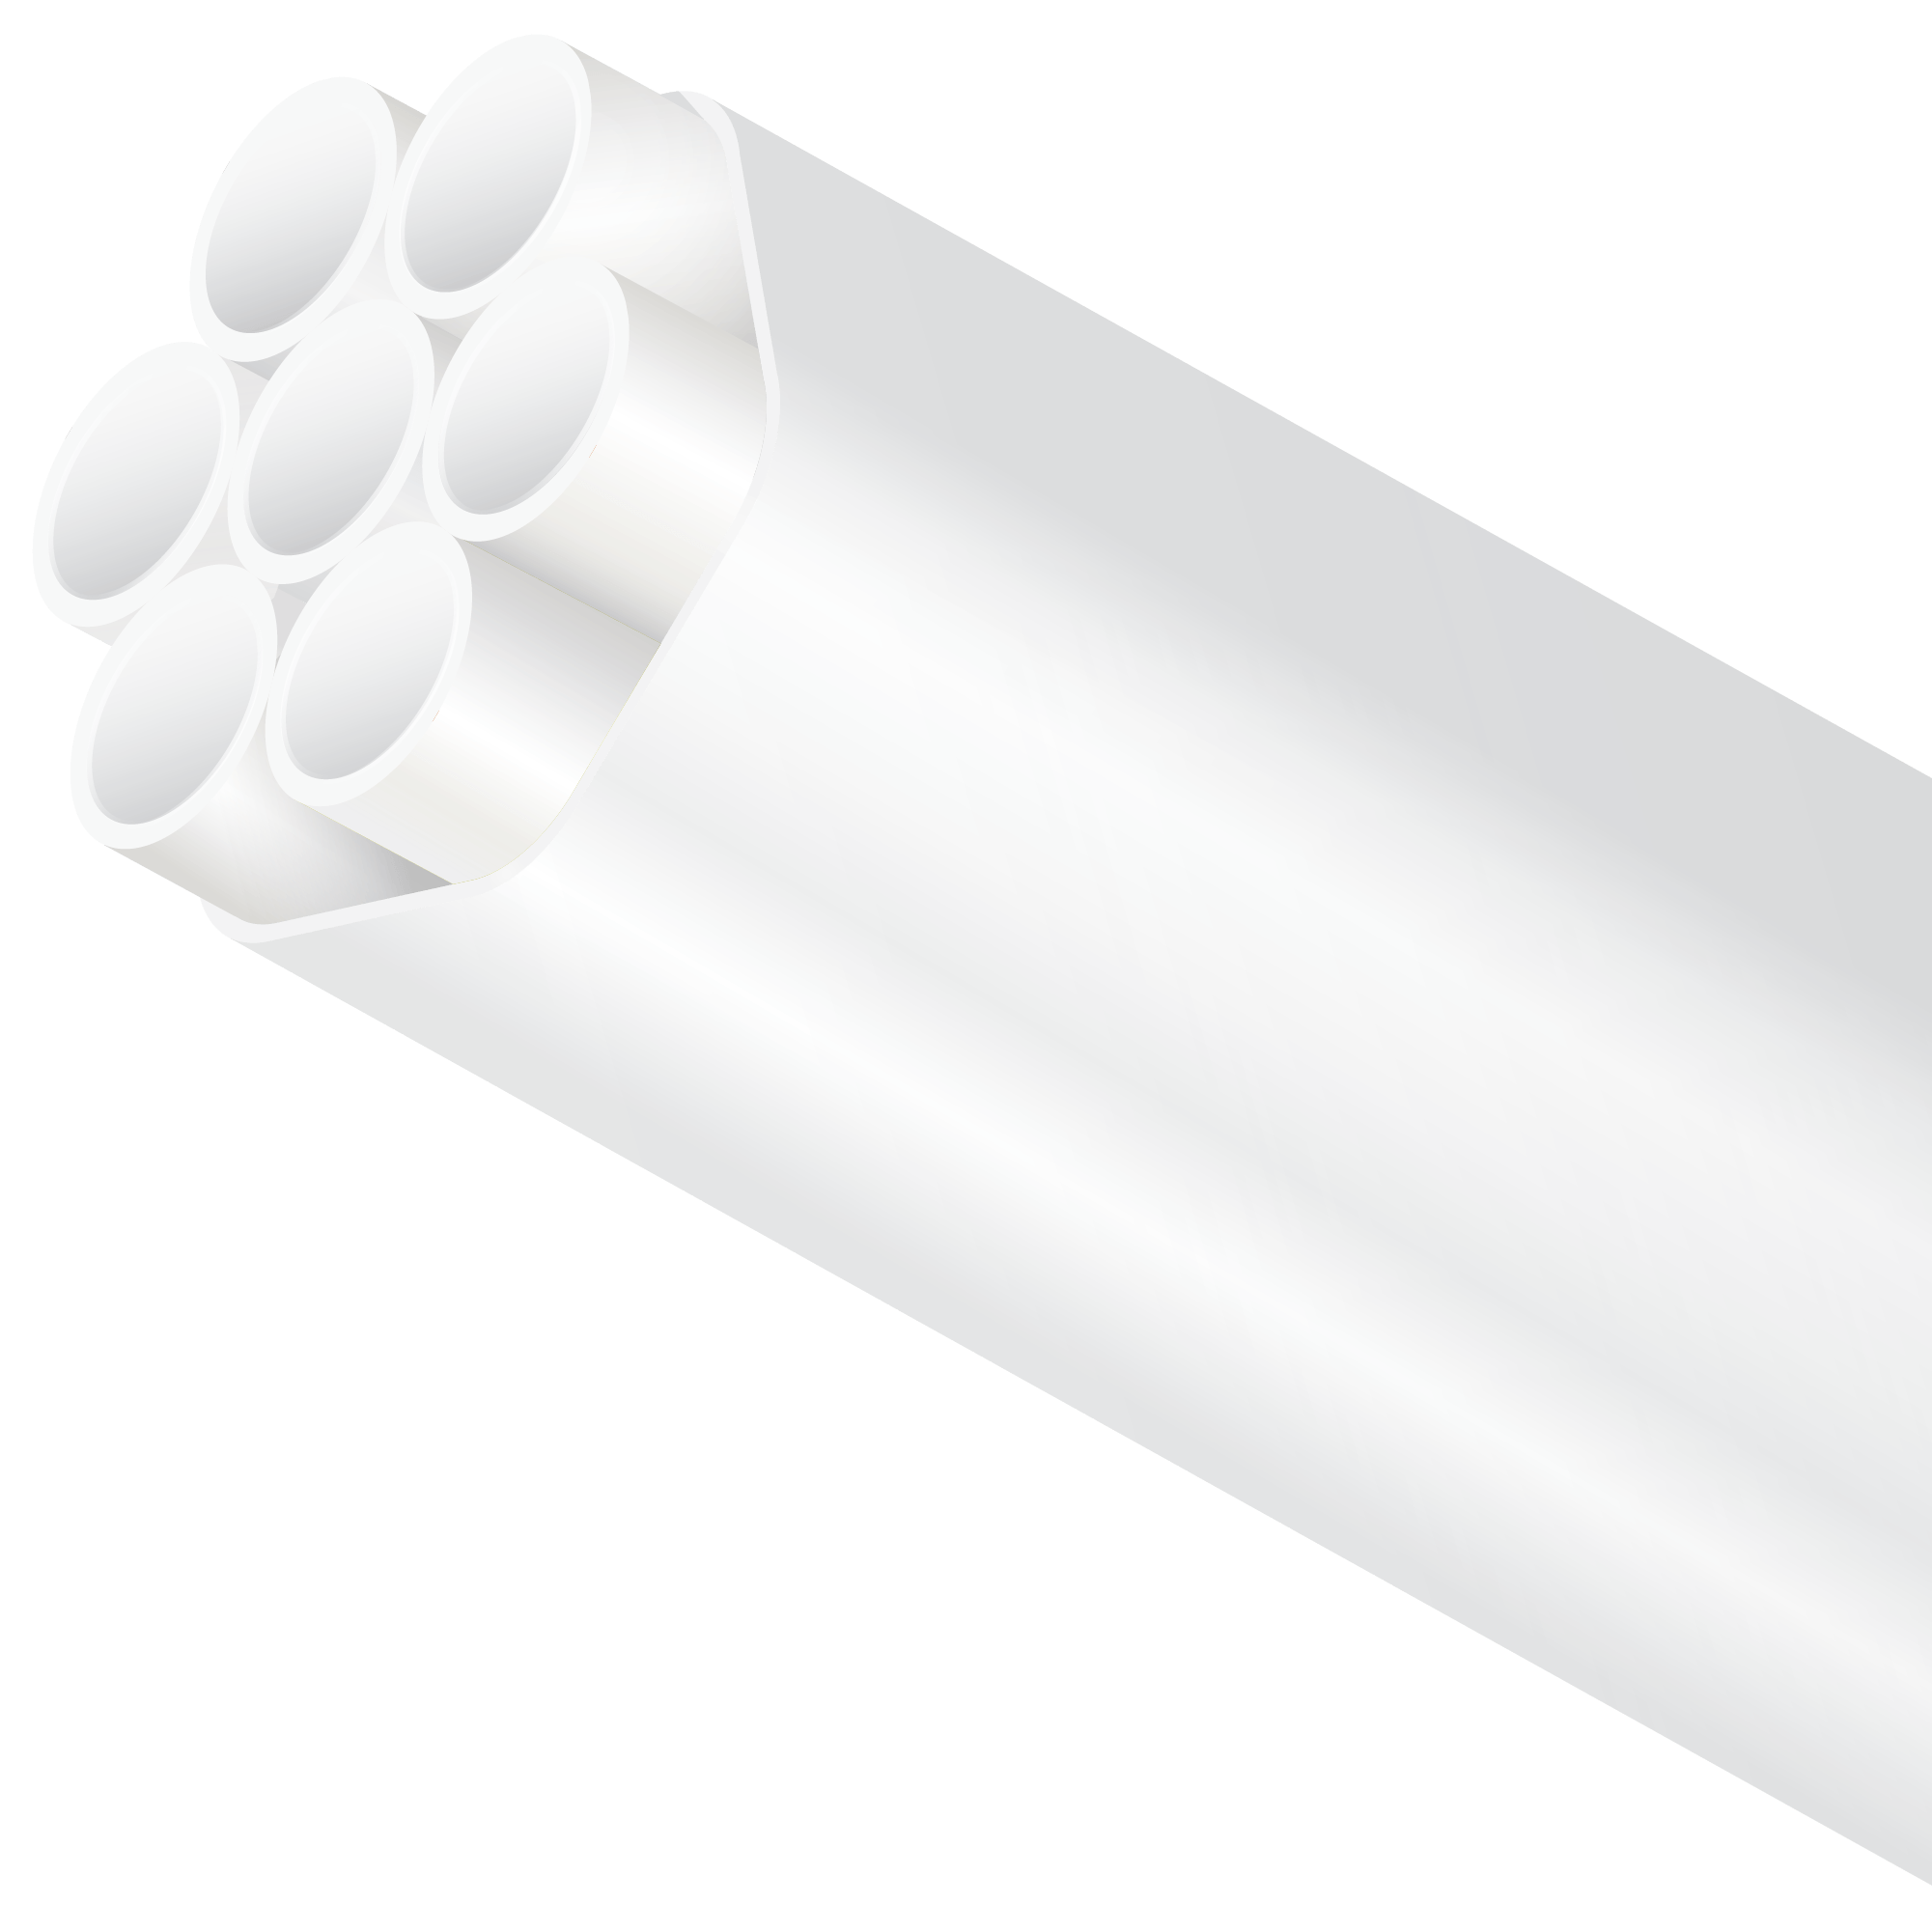 Dura-Line was the first to pioneer this technology and introduce it to the U.S. market. LSZH Conduit and MicroDucts, verified by the NRTL (Intertek) to ETL standards UL1685-4 and IEC 60754-1, exhibit excellent properties such as low-flame propagation, low-smoke generation, zero-halogen emissions, and excellent low-temperature mechanical properties. They are designed for use in applications where smoke, toxic fumes, and acidic gas pose a health risk and possible damage to electronic equipment. Examples include enclosed public areas and poorly ventilated areas such as tunnels, mass transit corridors, behind-the-wall, control rooms, and confined spaces. 